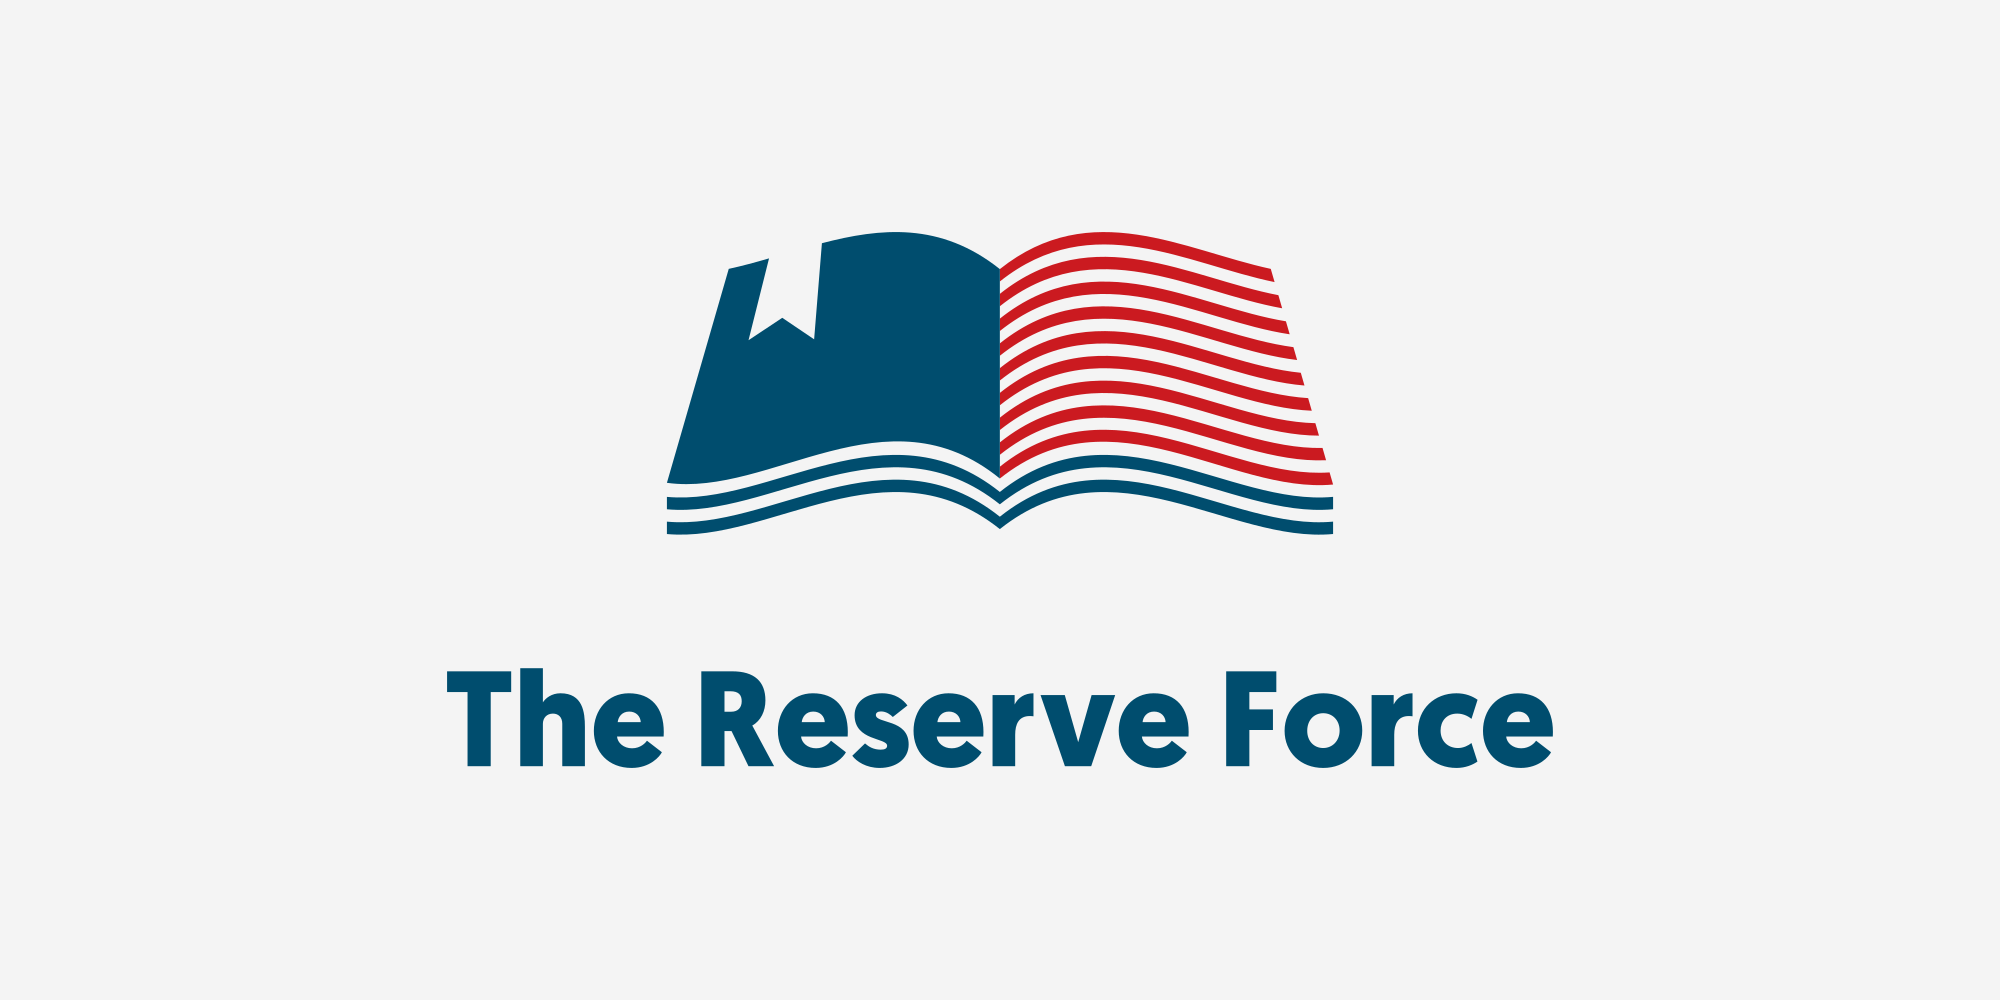 Windows | The Reserve Force